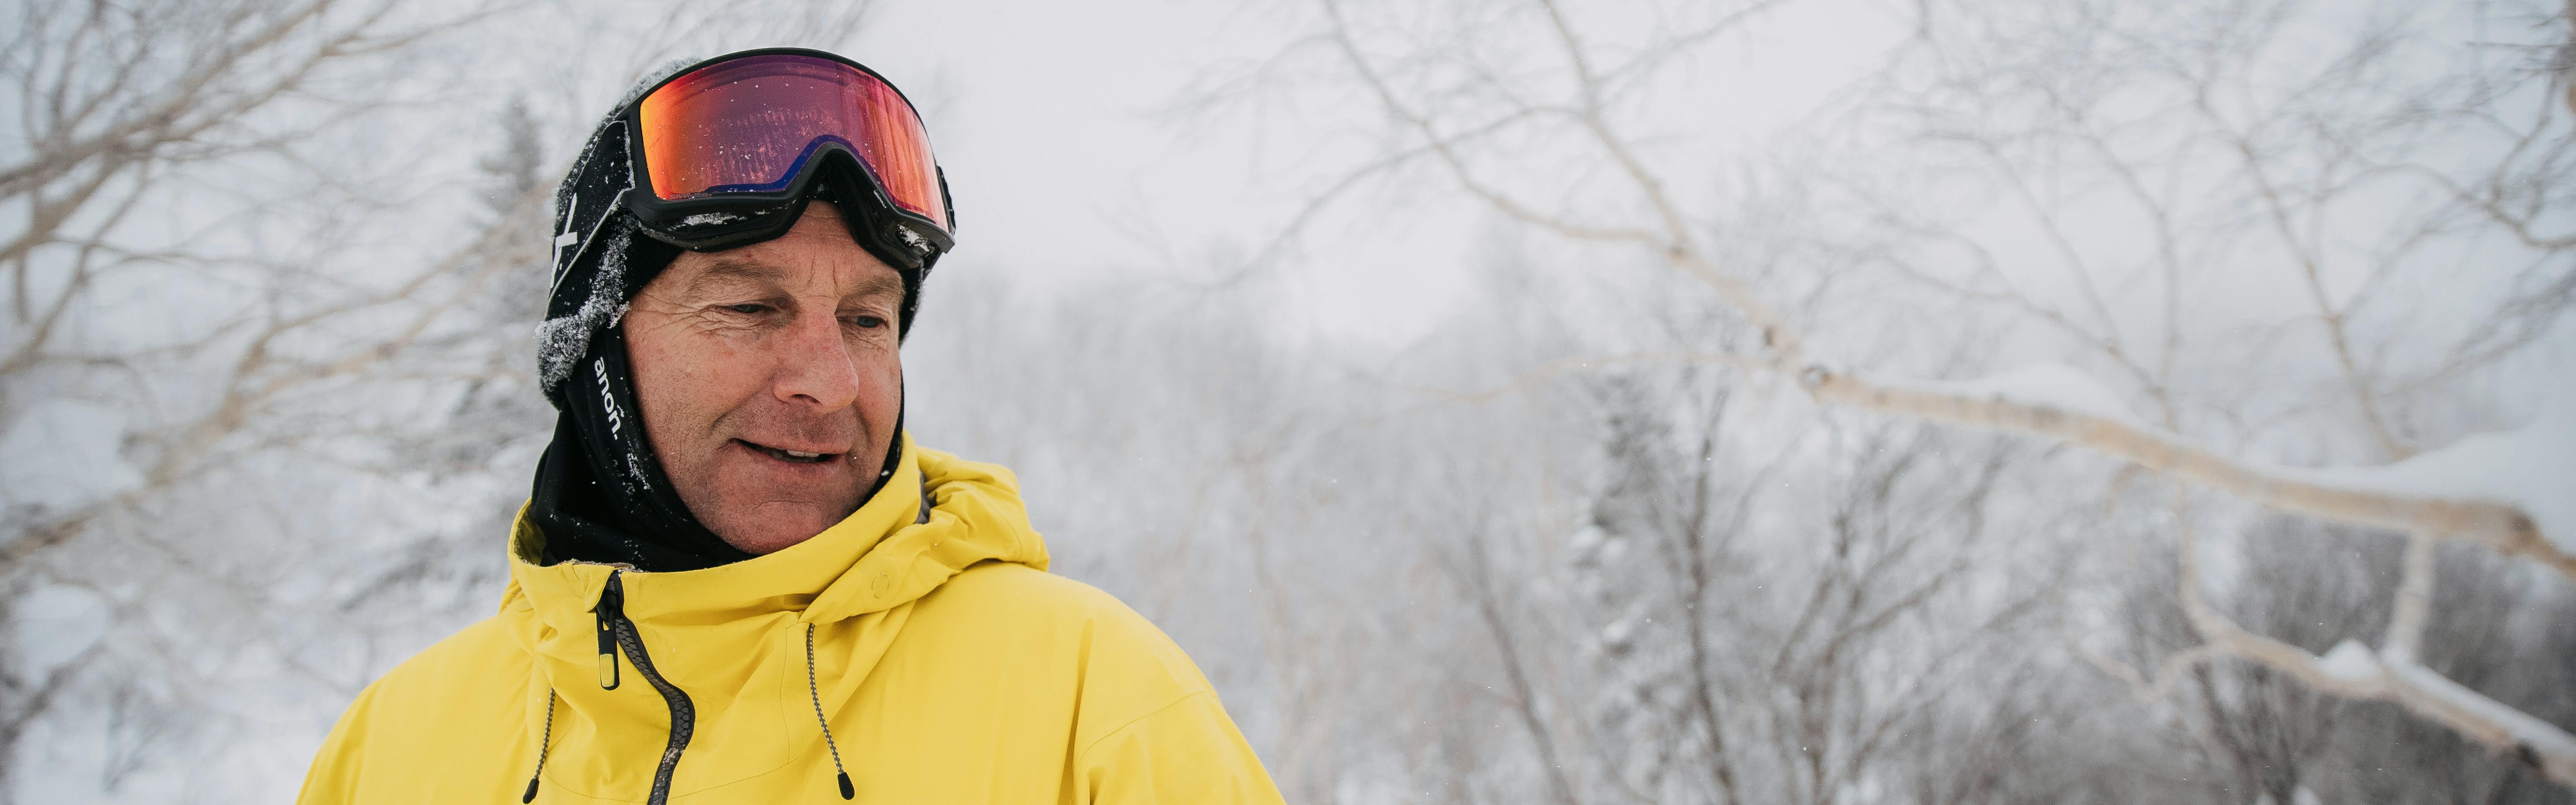 Dave Downing smiles and looks down while wearing a yellow jacket and googles. The landscape behind him is snowy and gray.